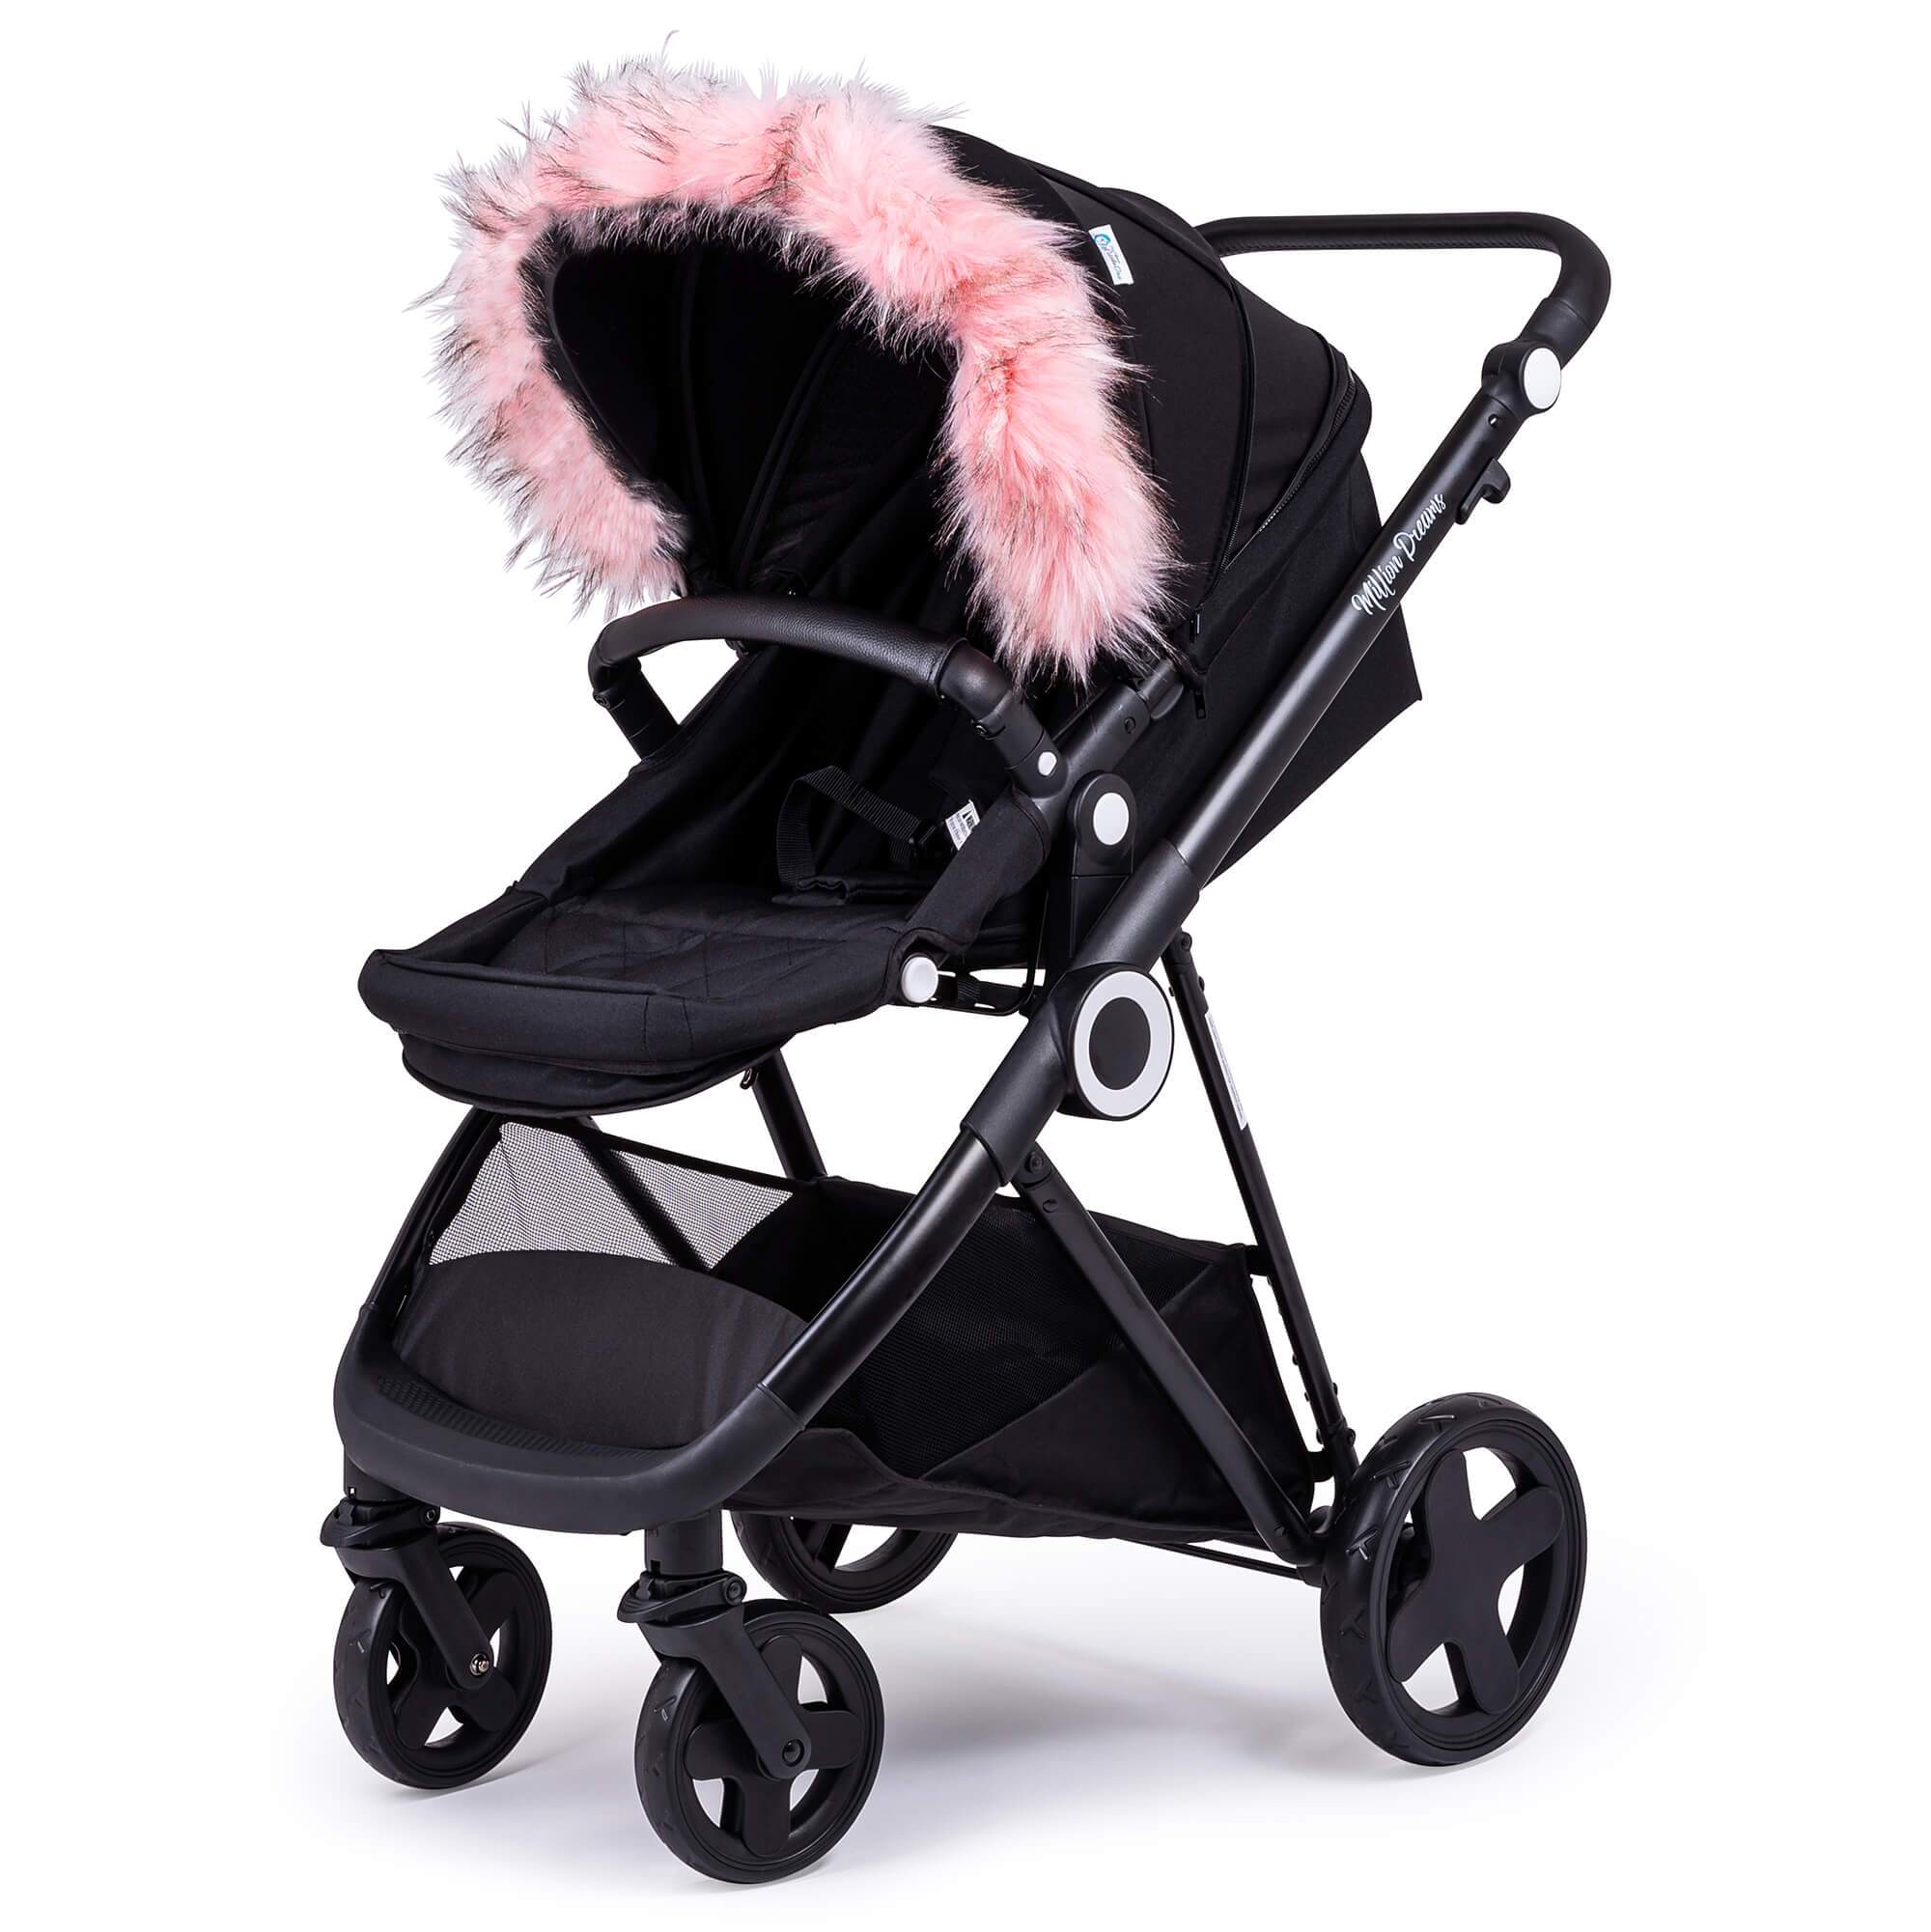 Pram Fur Hood Trim Attachment for Pushchair Compatible with My Babiie - Light Pink / Fits All Models | For Your Little One